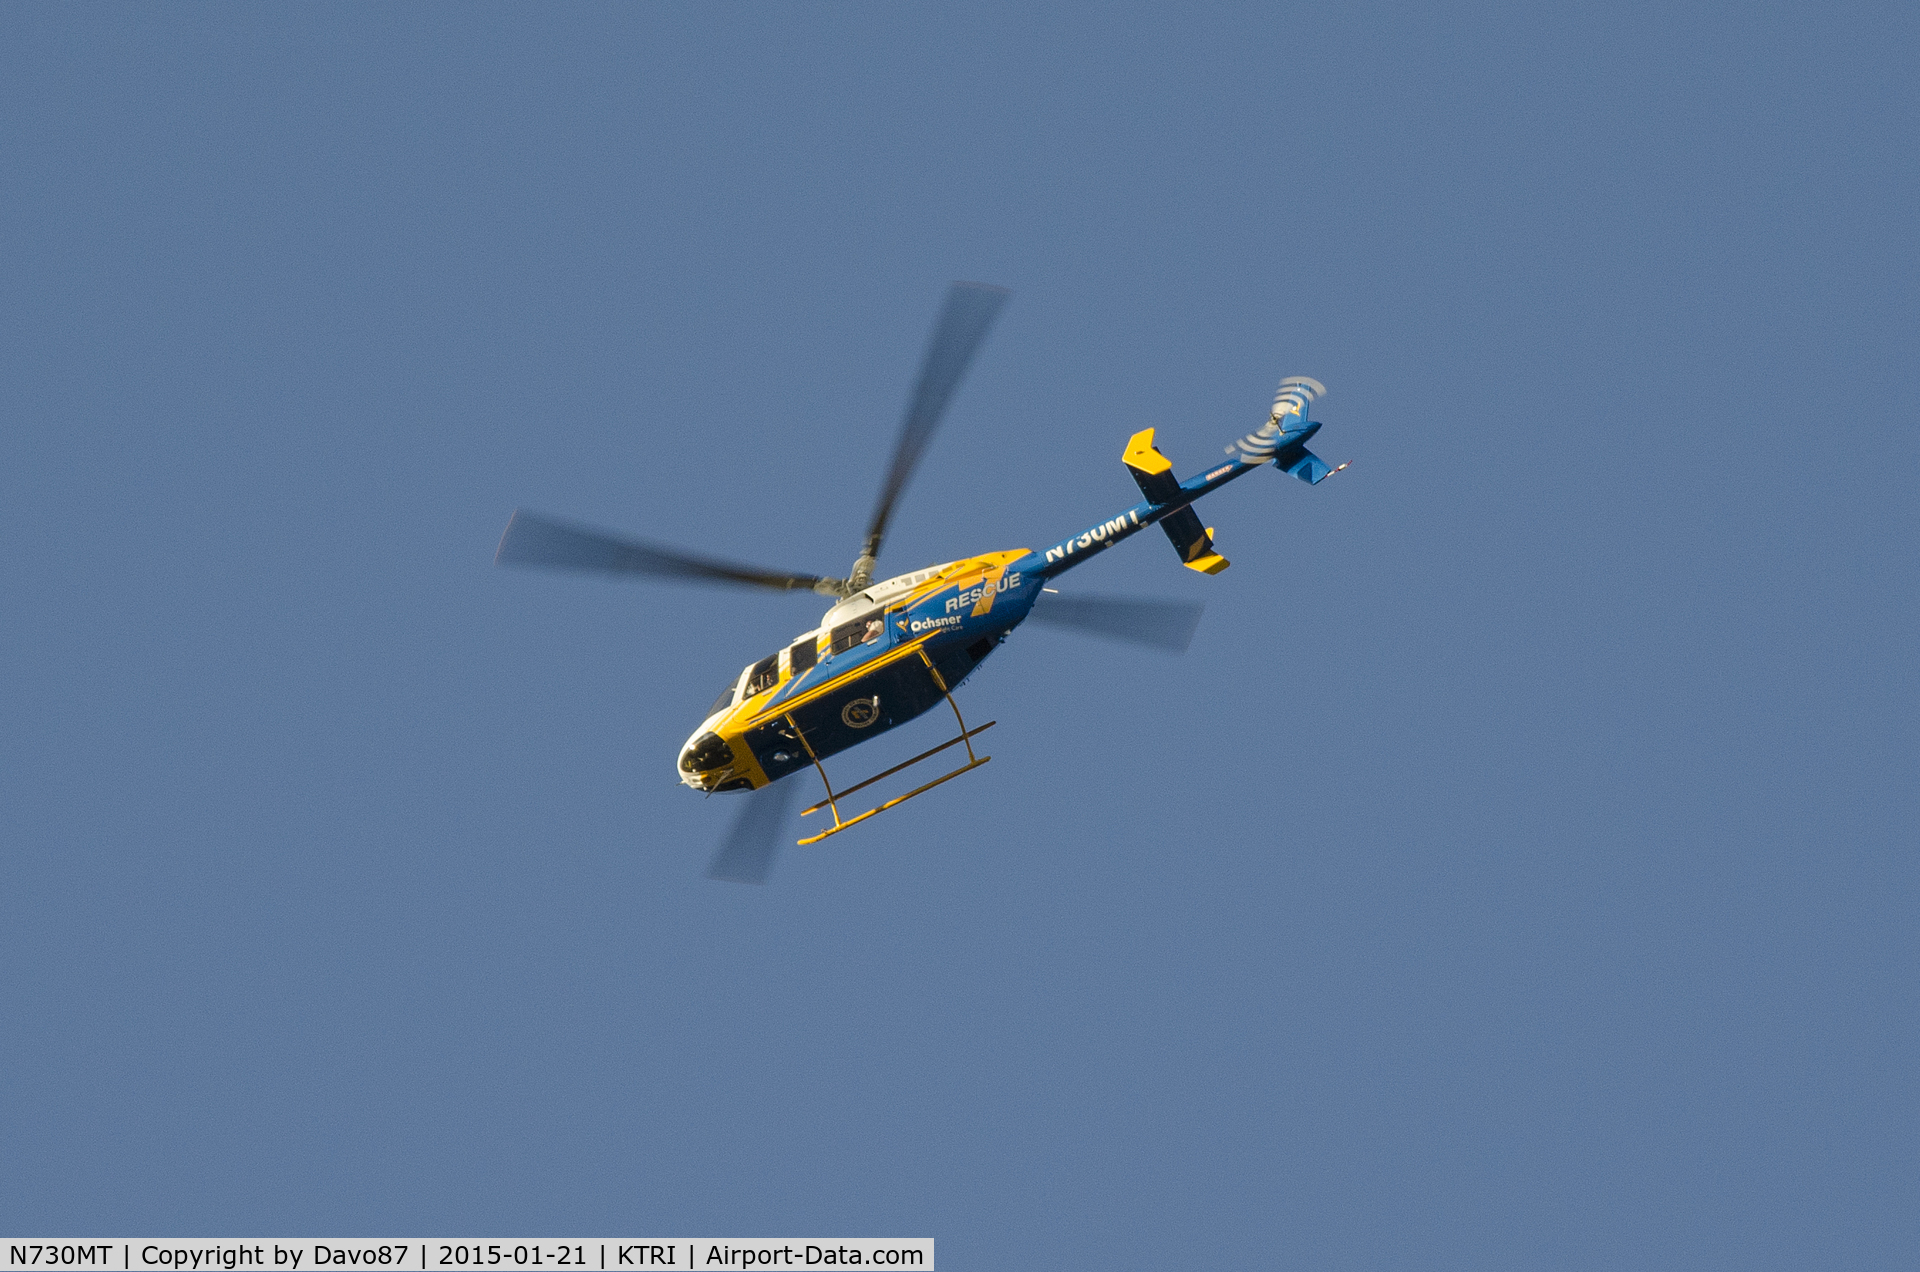 N730MT, 2014 Bell 407 C/N 54496, Photographed flying over Bristol Motor Speedway this afternoon (01-21-15):
N Number N730MT is a 2014 BELL HELICOPTER TEXTRON CANADA 407 with Serial Number 54496
8 seat Rotorcraft Aircraft
Type Certificated
With an Air Worthiness Date of 2014-05-05